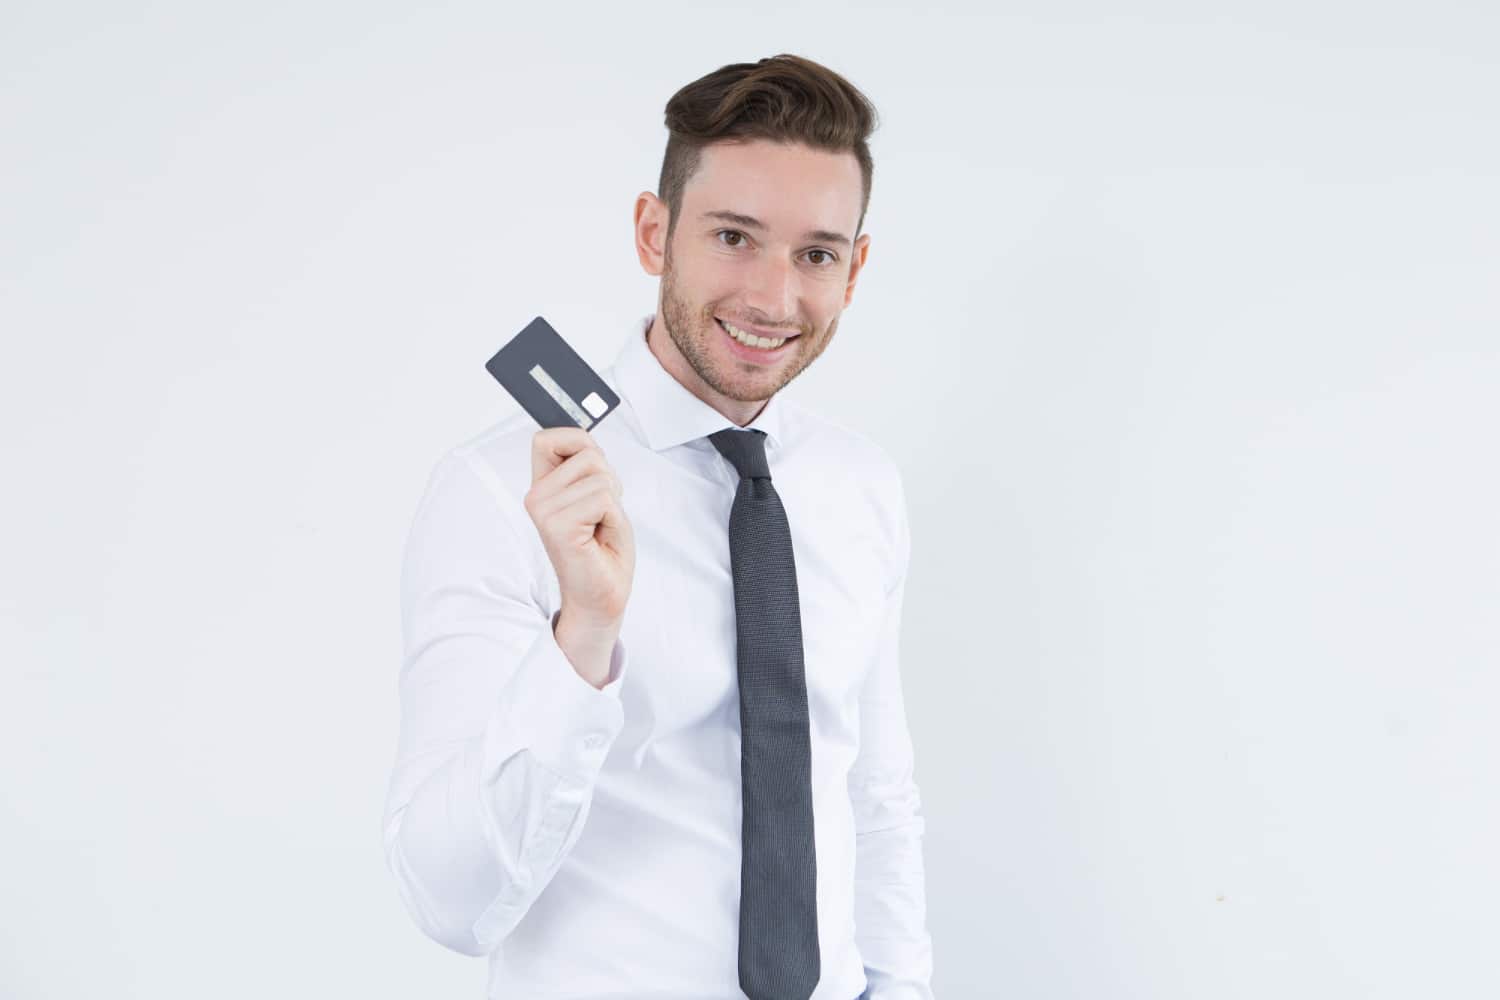 A GUY HOLDING THE Scotia Momentum Business credit card.